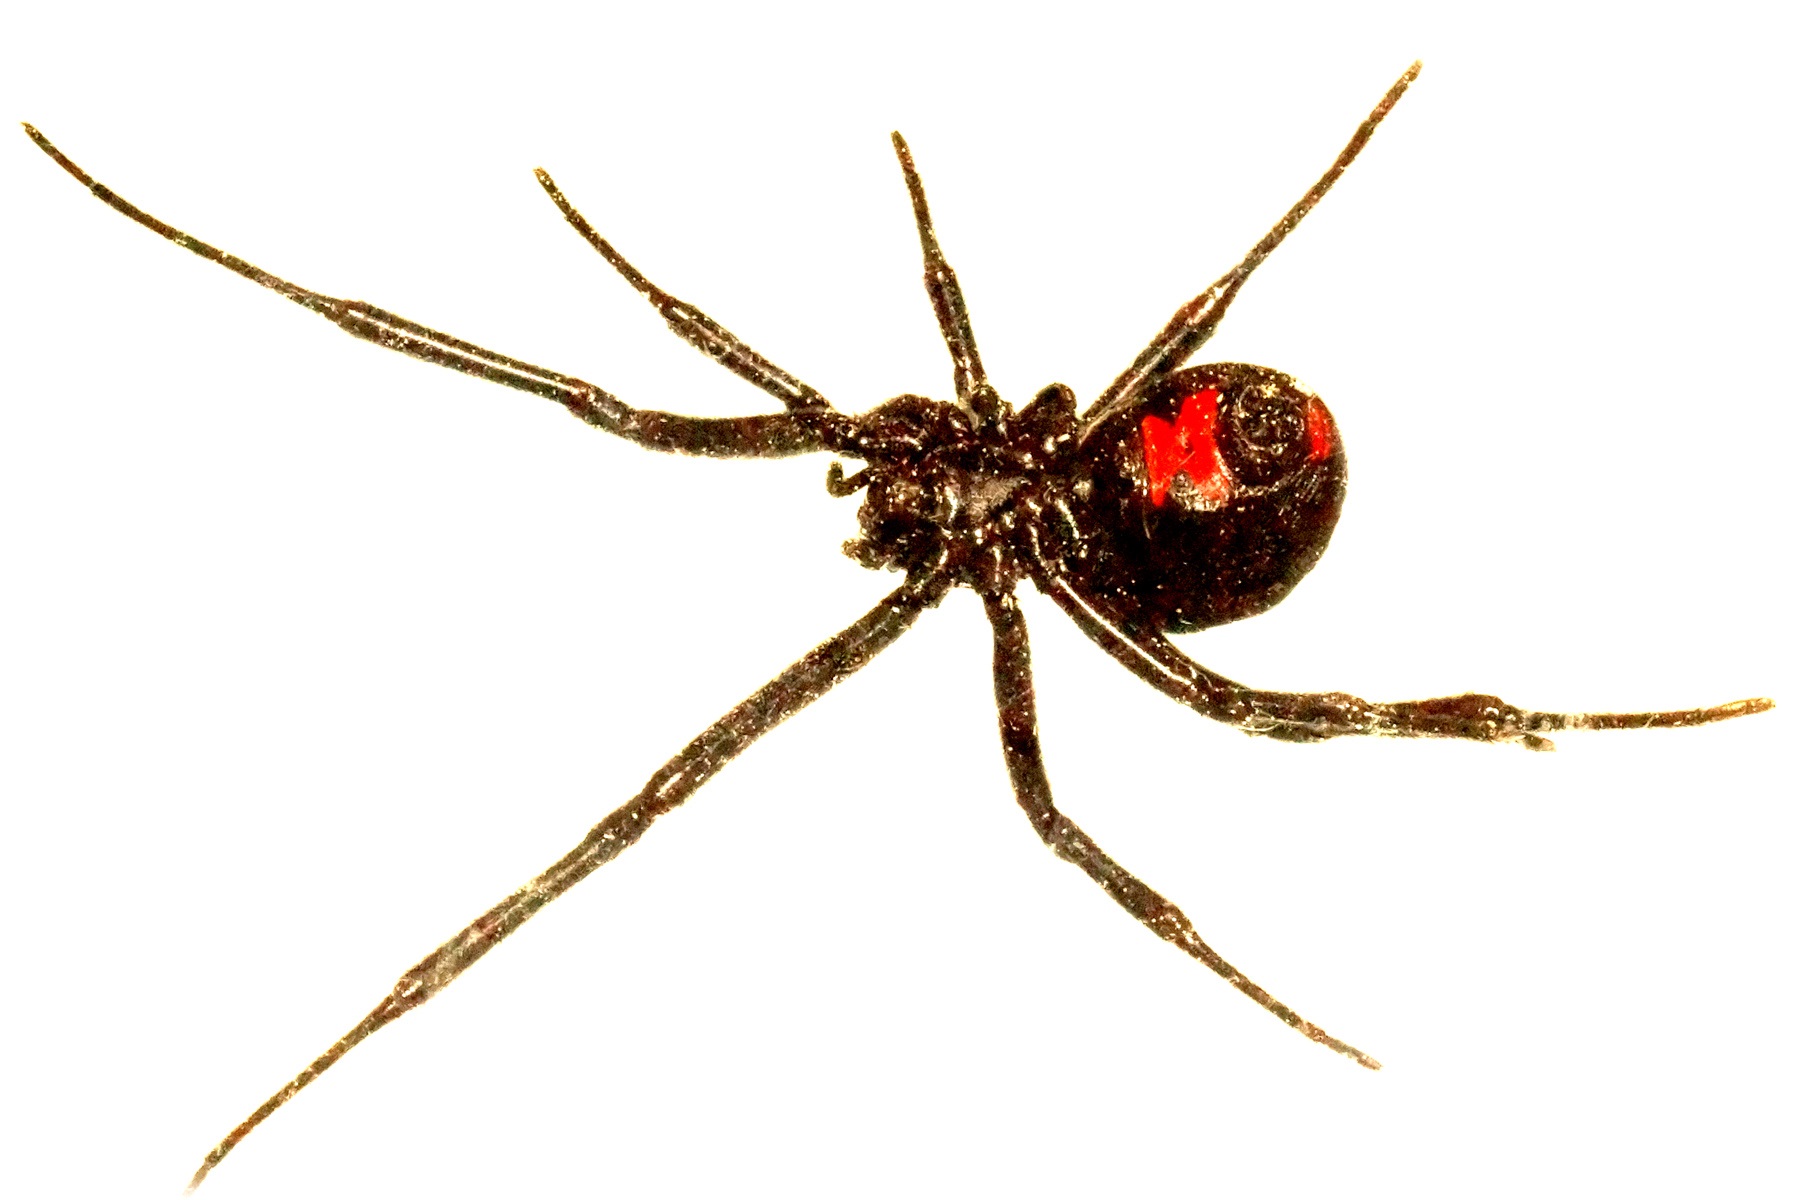 How to identify Brown Widow Spiders